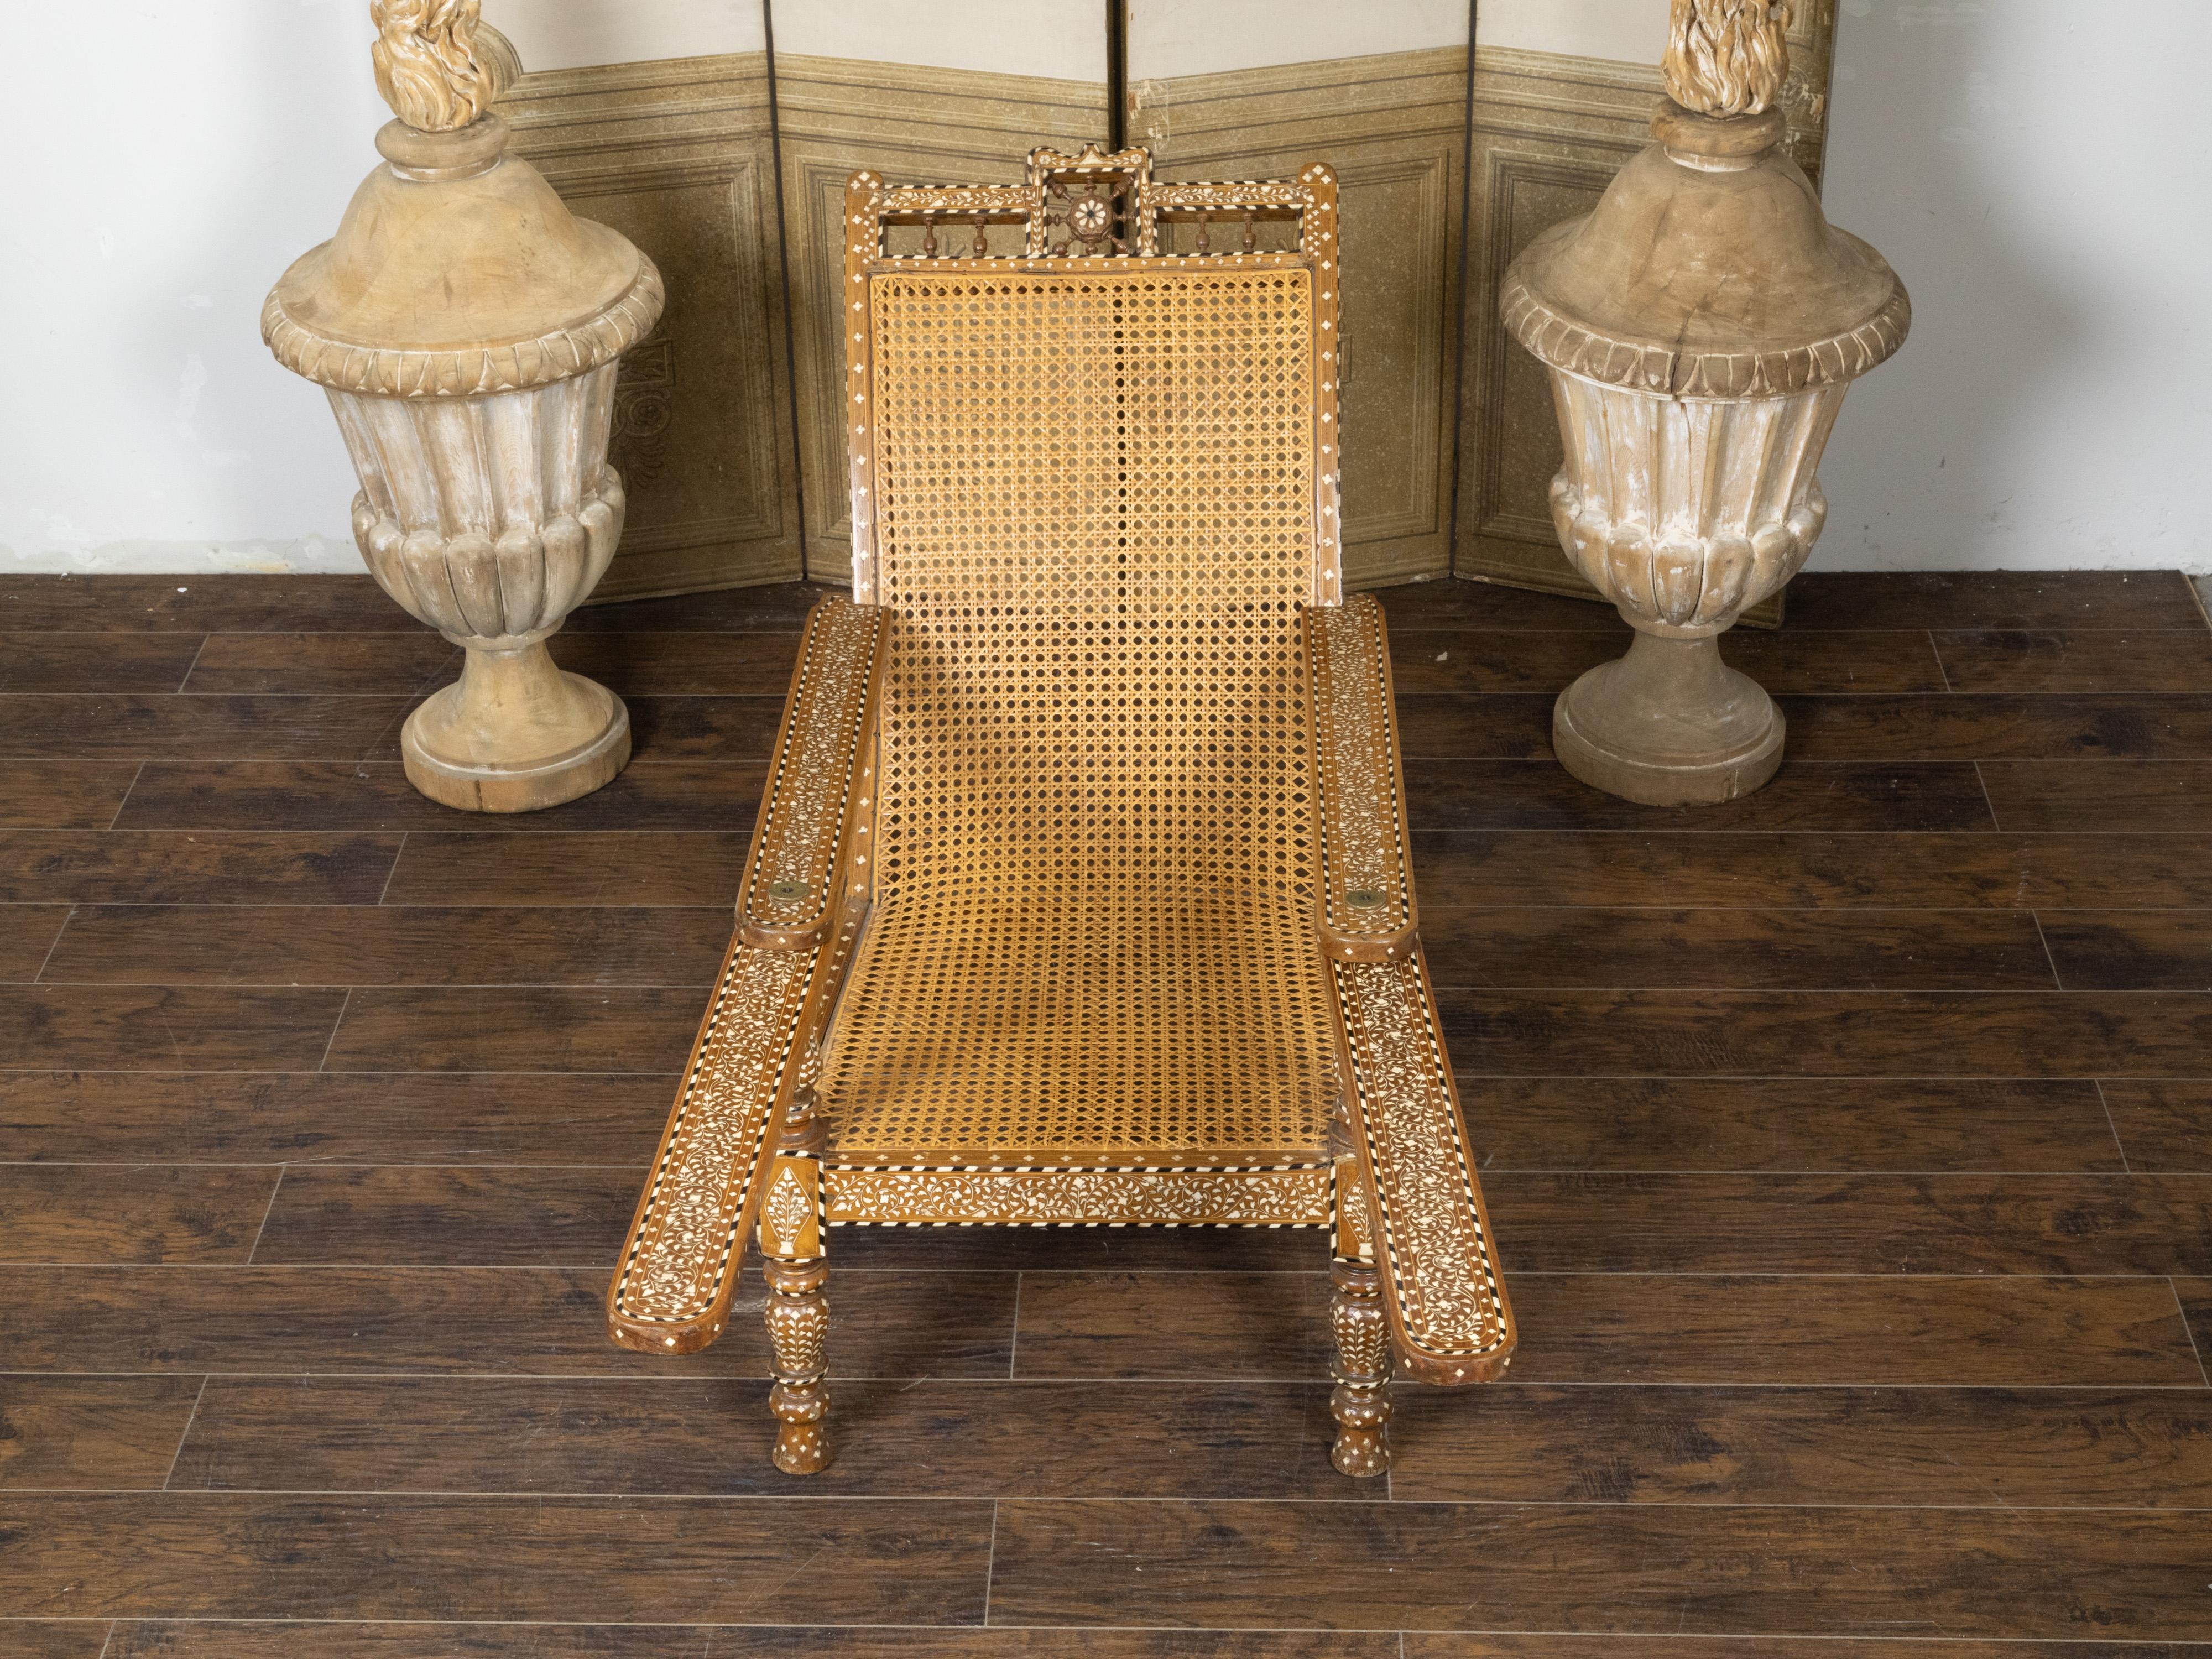 Anglo-Indian Inlaid Plantation Chair with Scrolling Foliage and Extending Arms For Sale 3